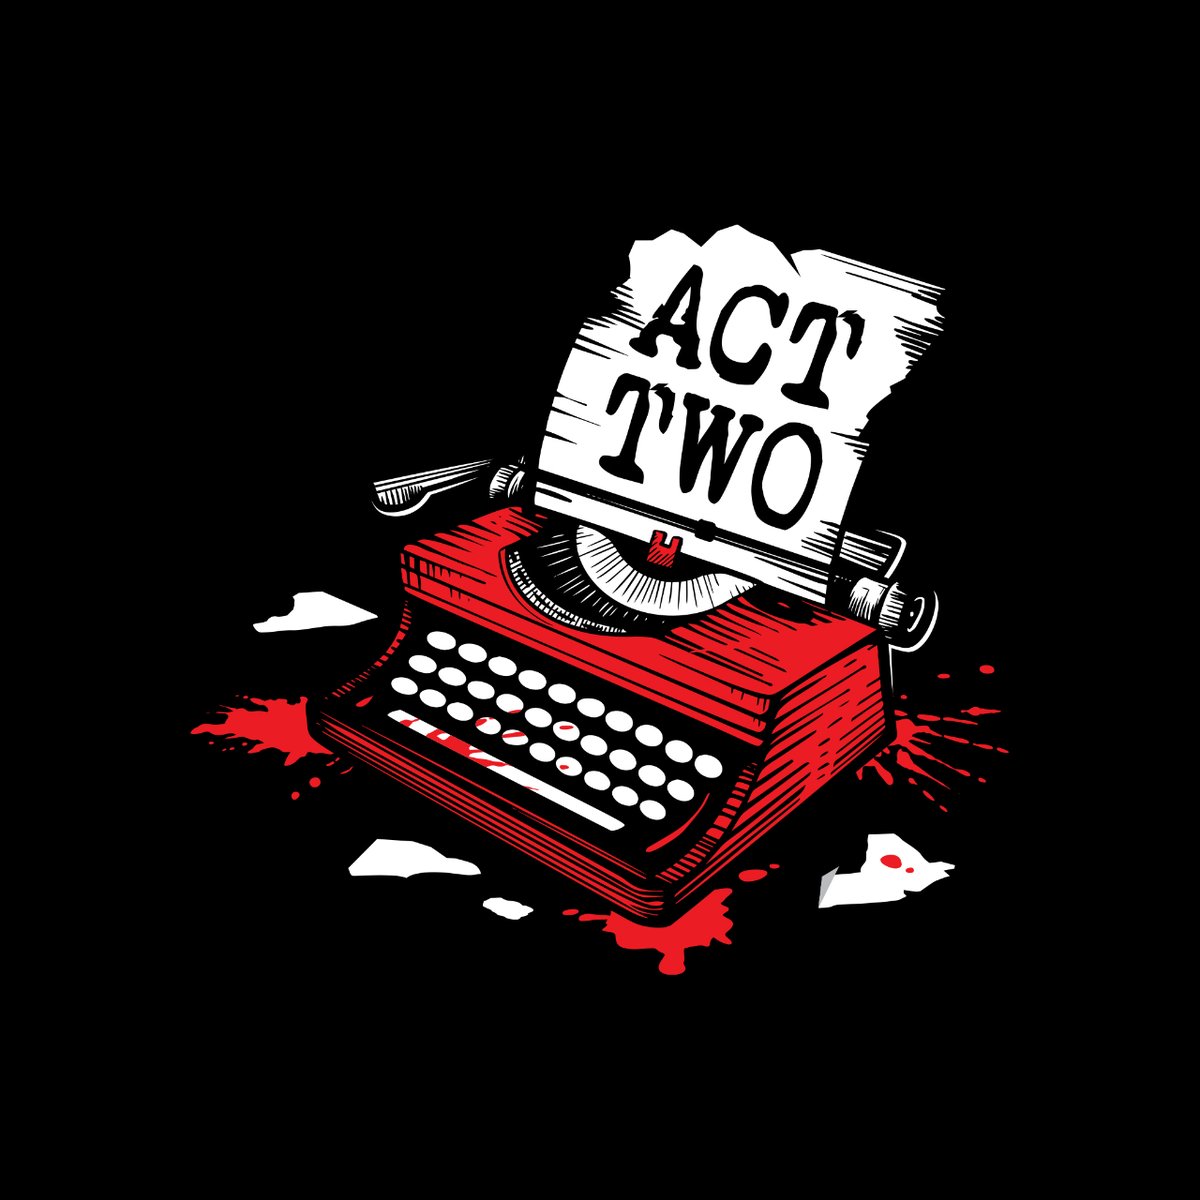 Act Two has rebranded! What do you think of the new #ActTwo Podcast logo?! To say we are obsessed would be an understatement.